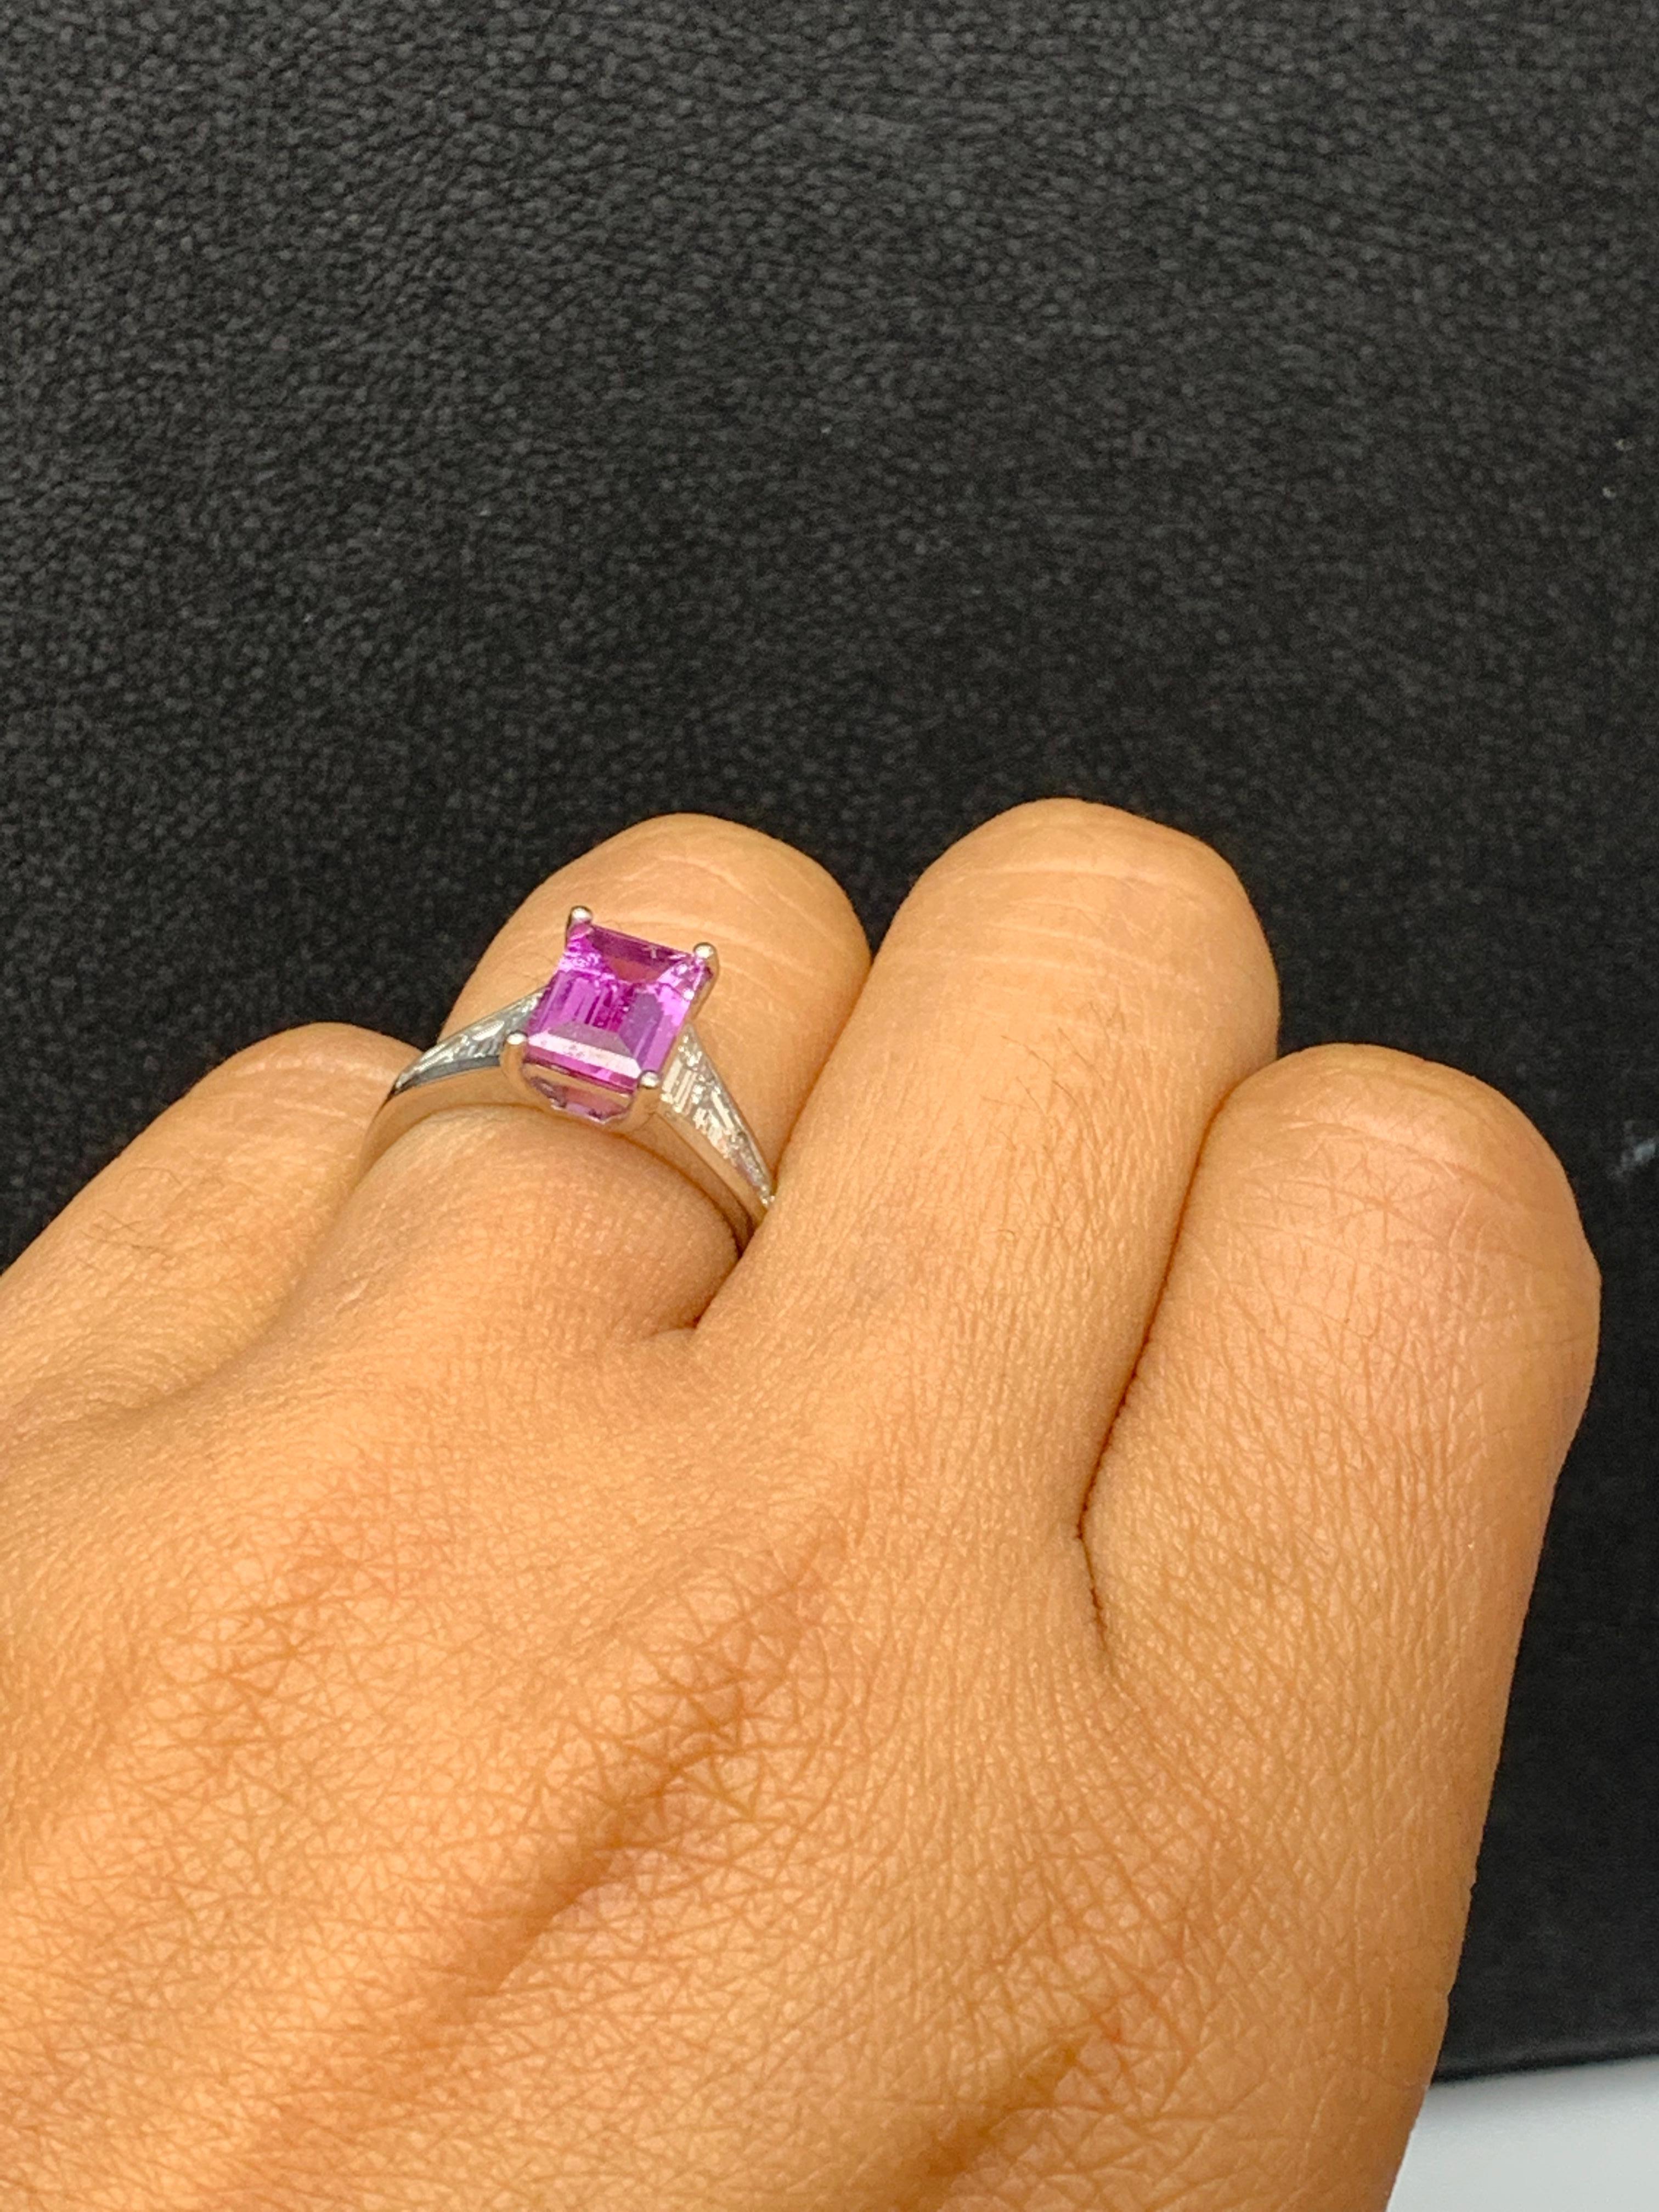 2.21 Carat Emerald Cut Pink Sapphire and Diamond Engagement Ring in Platinum For Sale 2